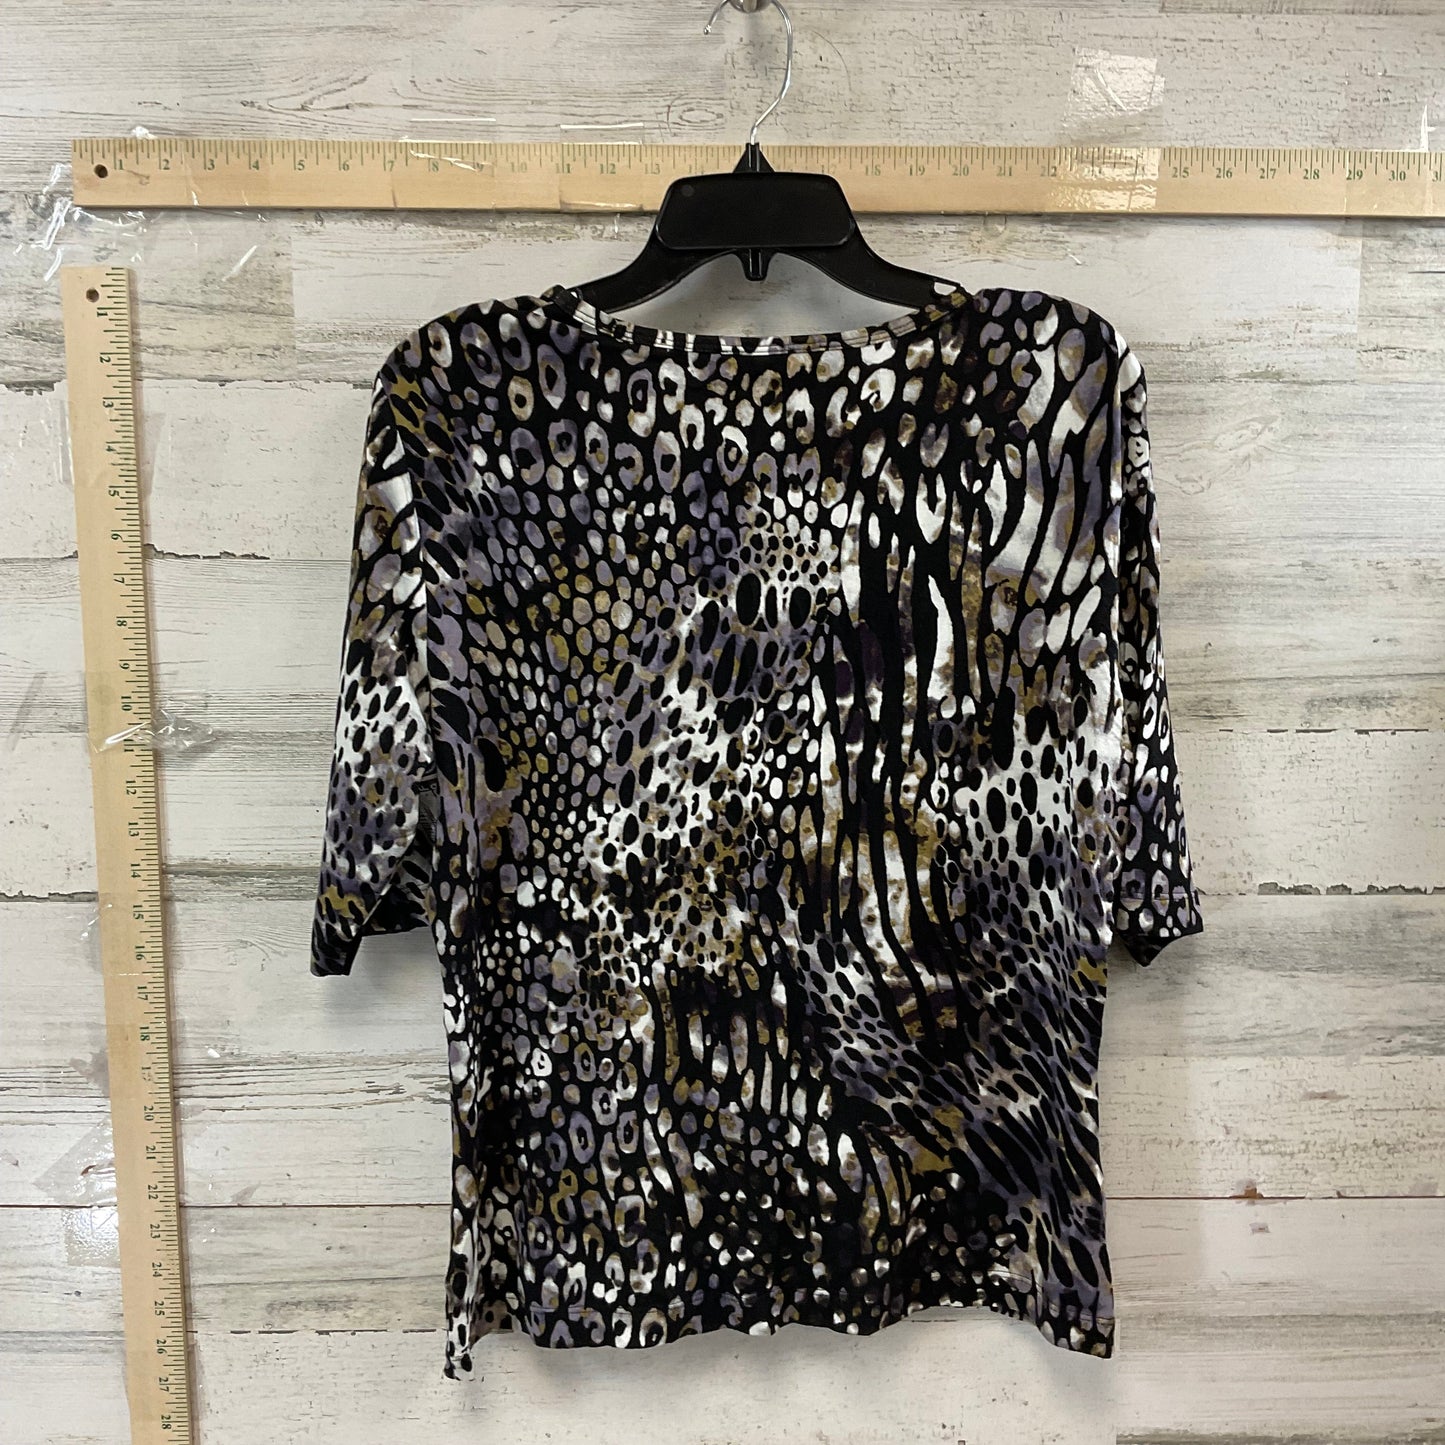 Black & White Top Short Sleeve St John Collection, Size L